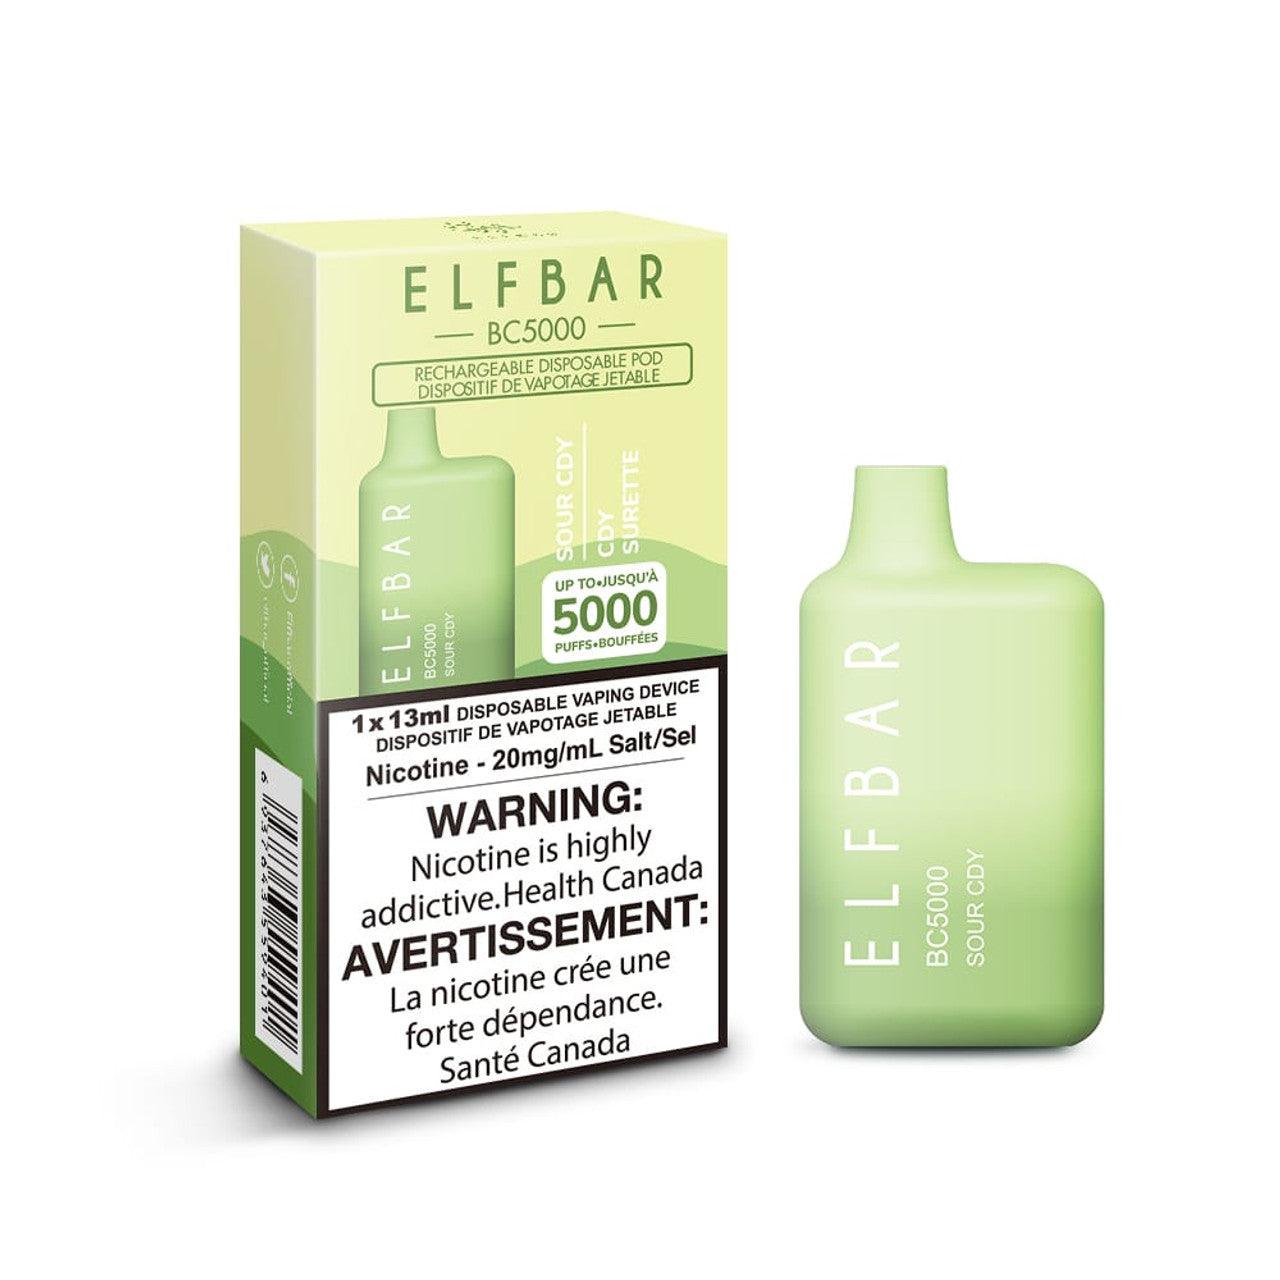 ELFBAR BC5000 - SOUR CDY (CANDY)